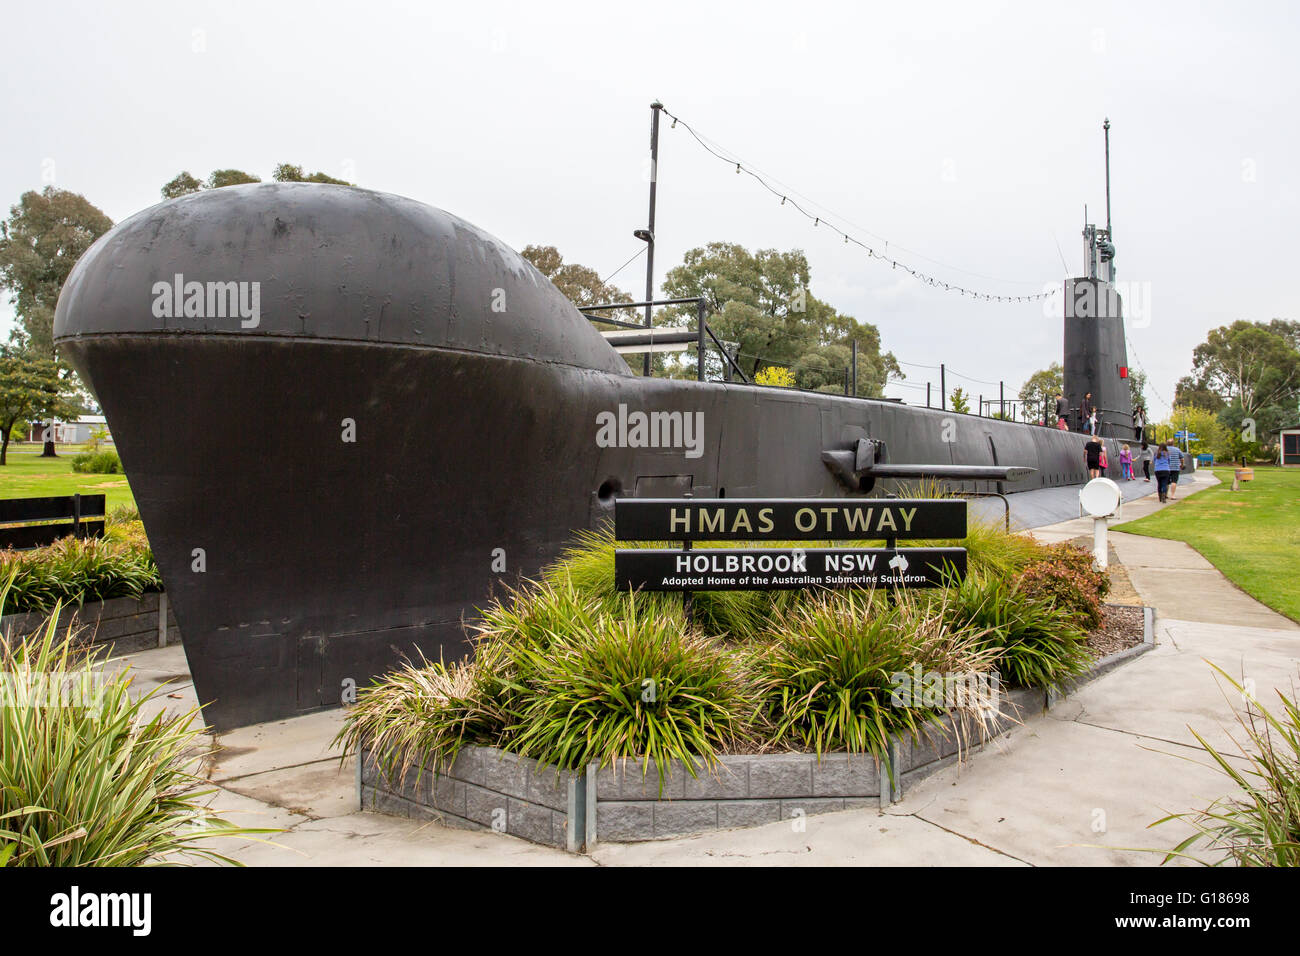 The famous landmark of HMAS Otway submarine in the rural town of Holbrook, in New South Wales, Australia. Stock Photo